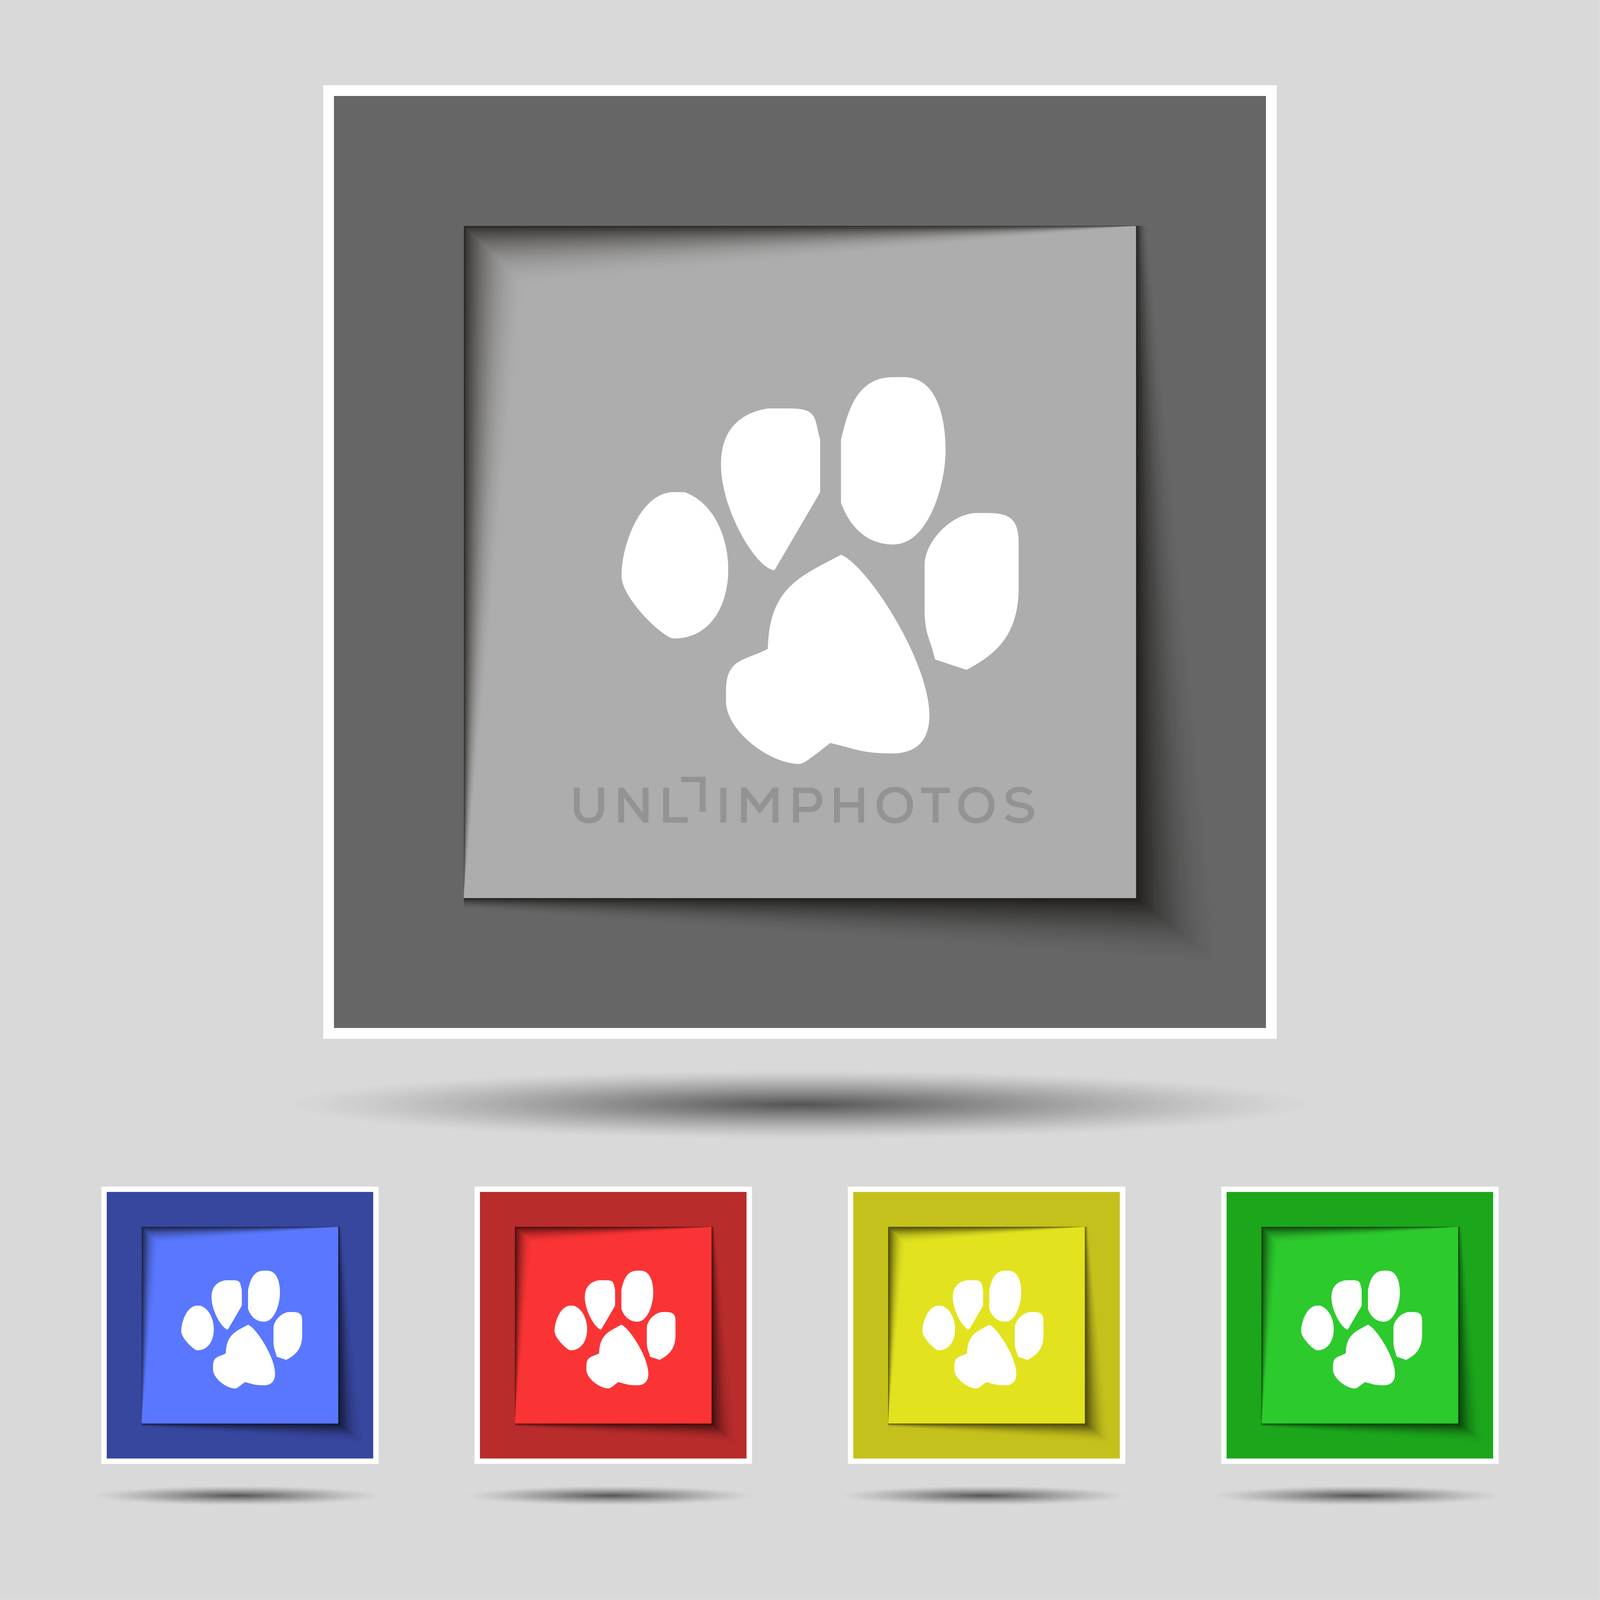 trace dogs icon sign on original five colored buttons. illustration